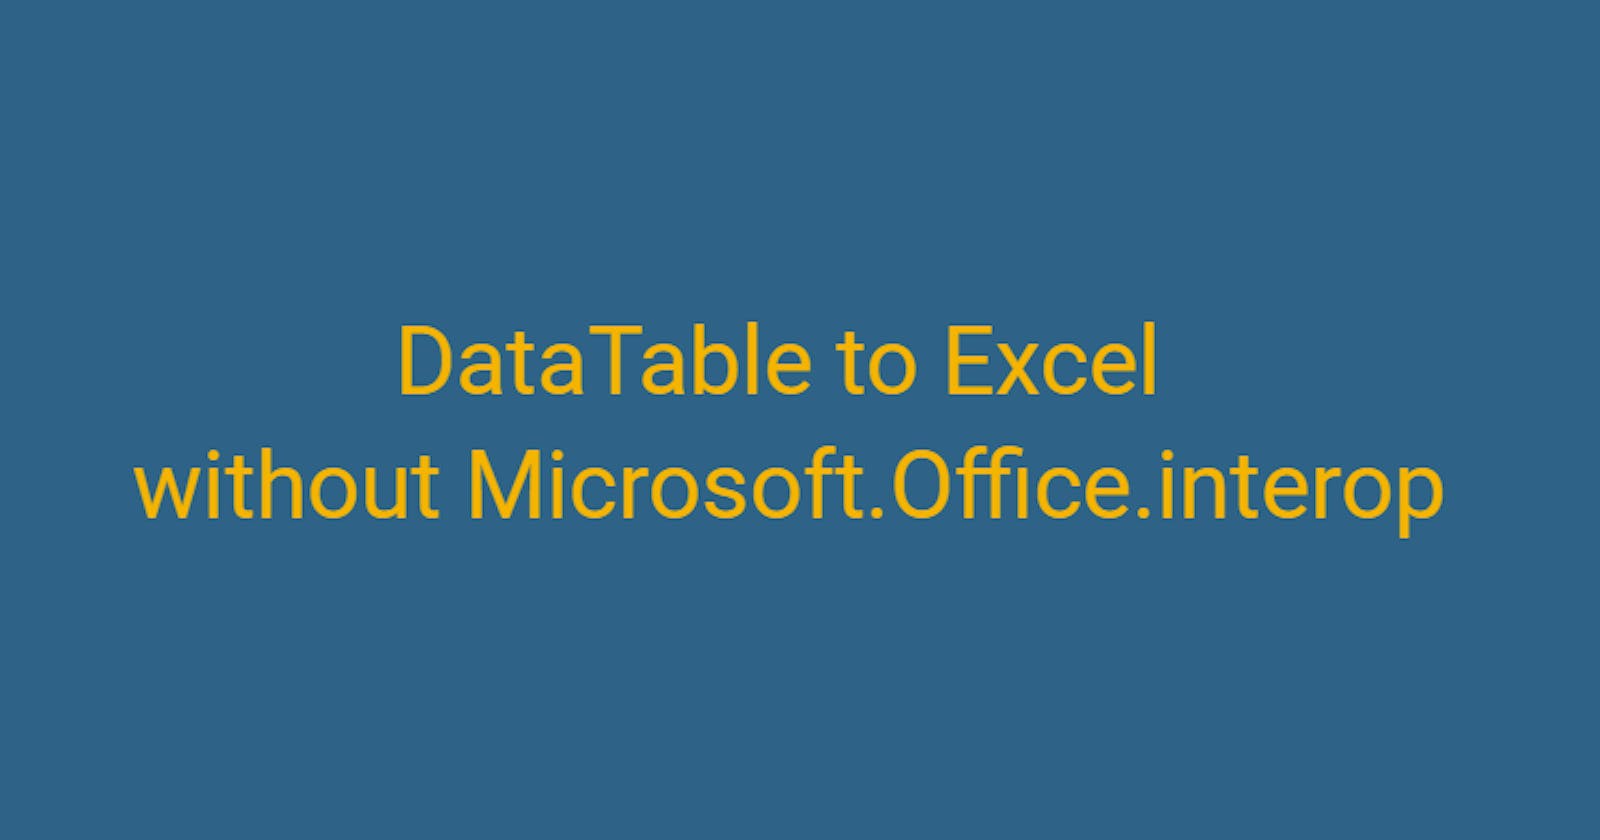 Alternative to MS Interop to Export DataTable to Excel